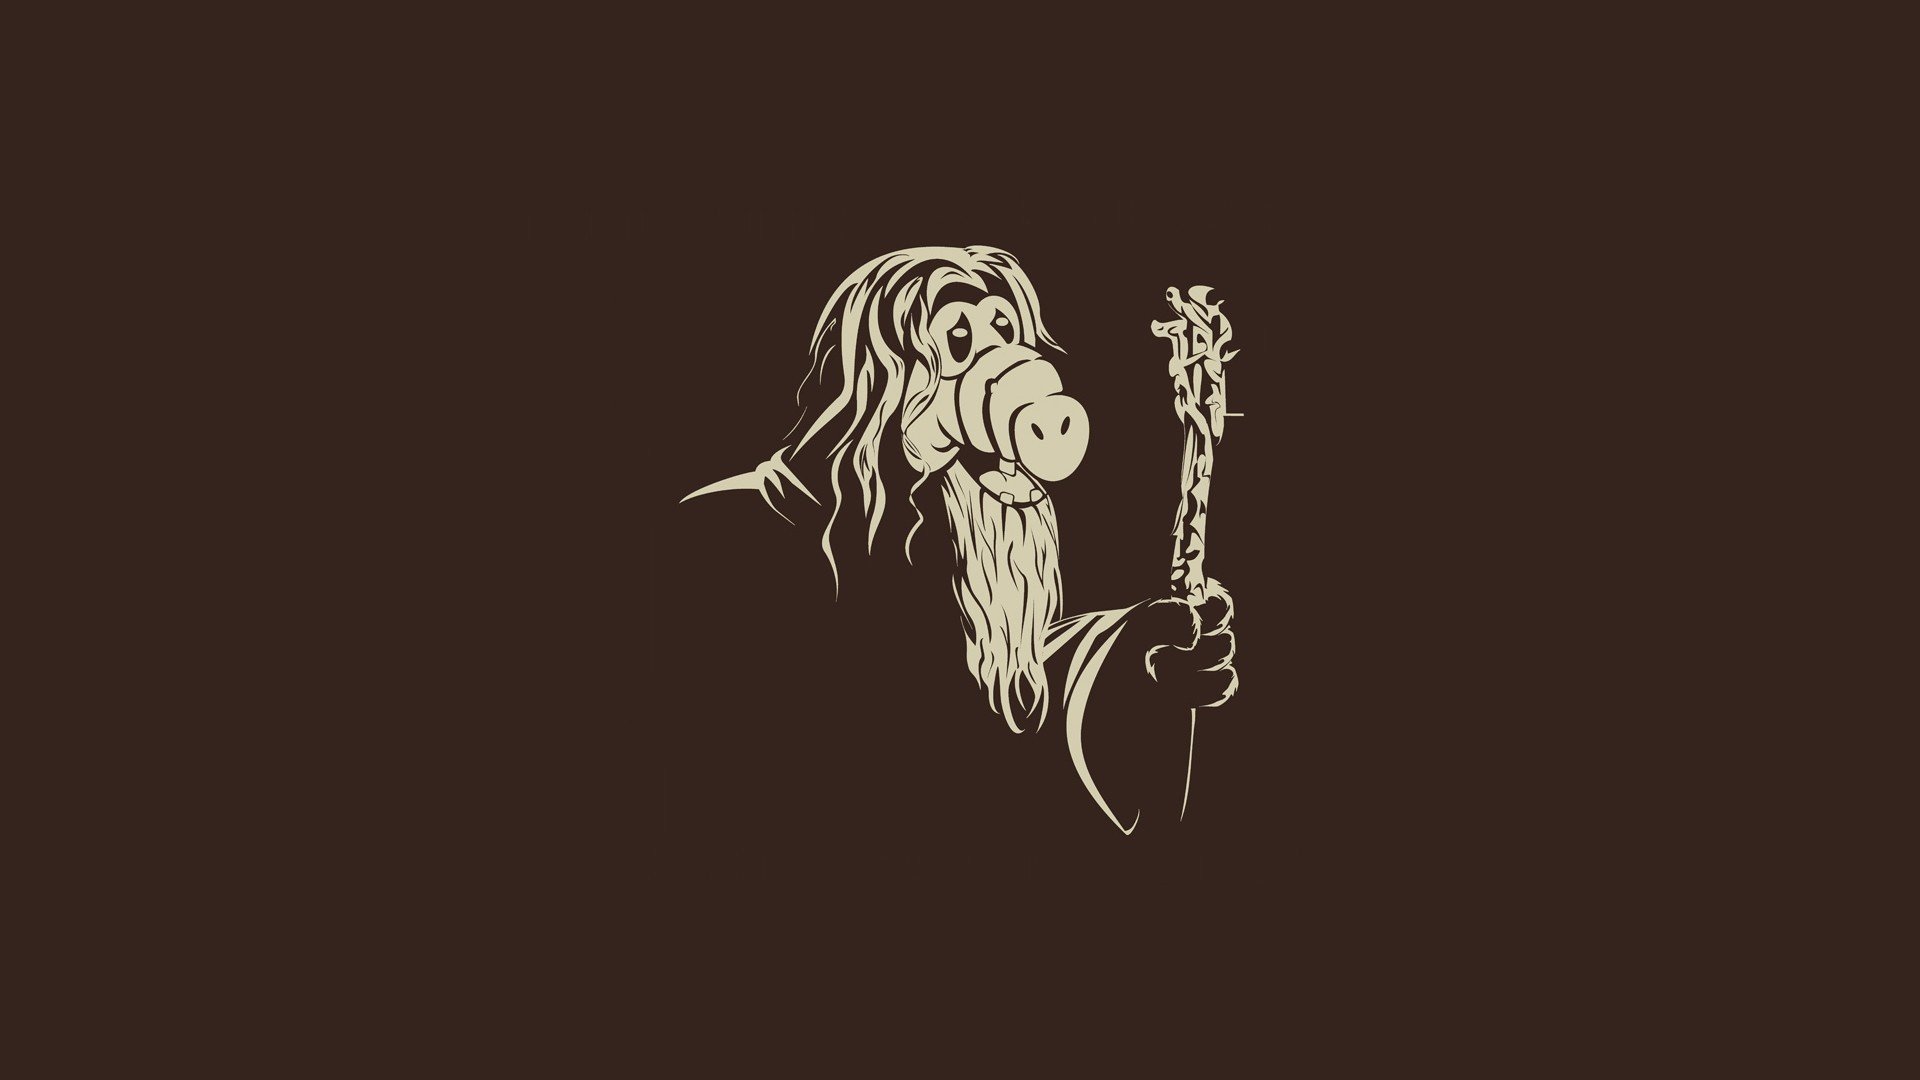 Alf, Gandalf, The Lord of the Rings Wallpaper